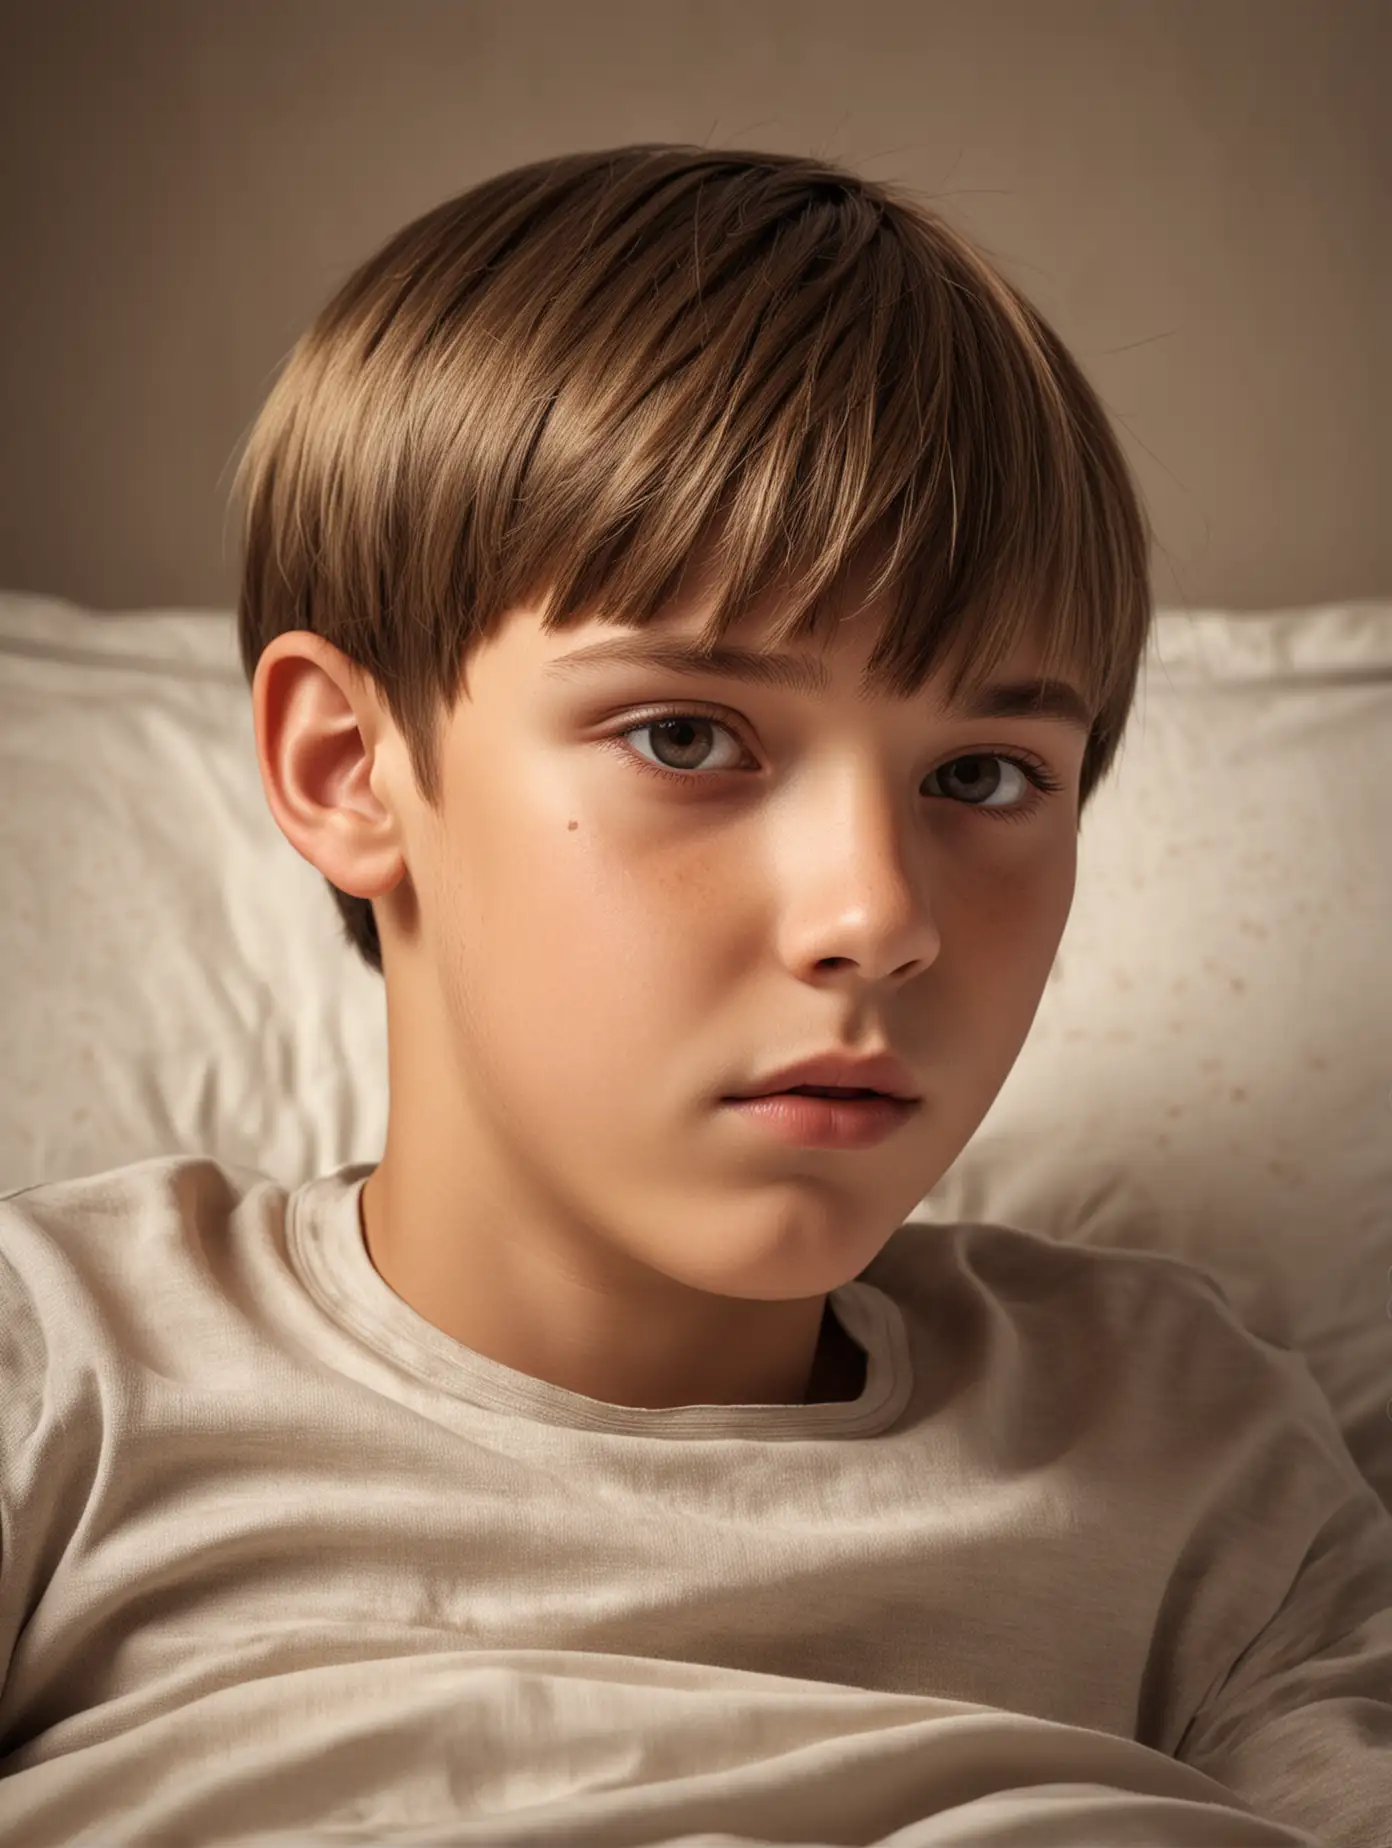 Hyper realistic photo of twelve  year old boy, close up smooth, straight, flat, shiny light brown, with highlights, bowl cut  hair, resting on bed,  bright light overhead, profile view 